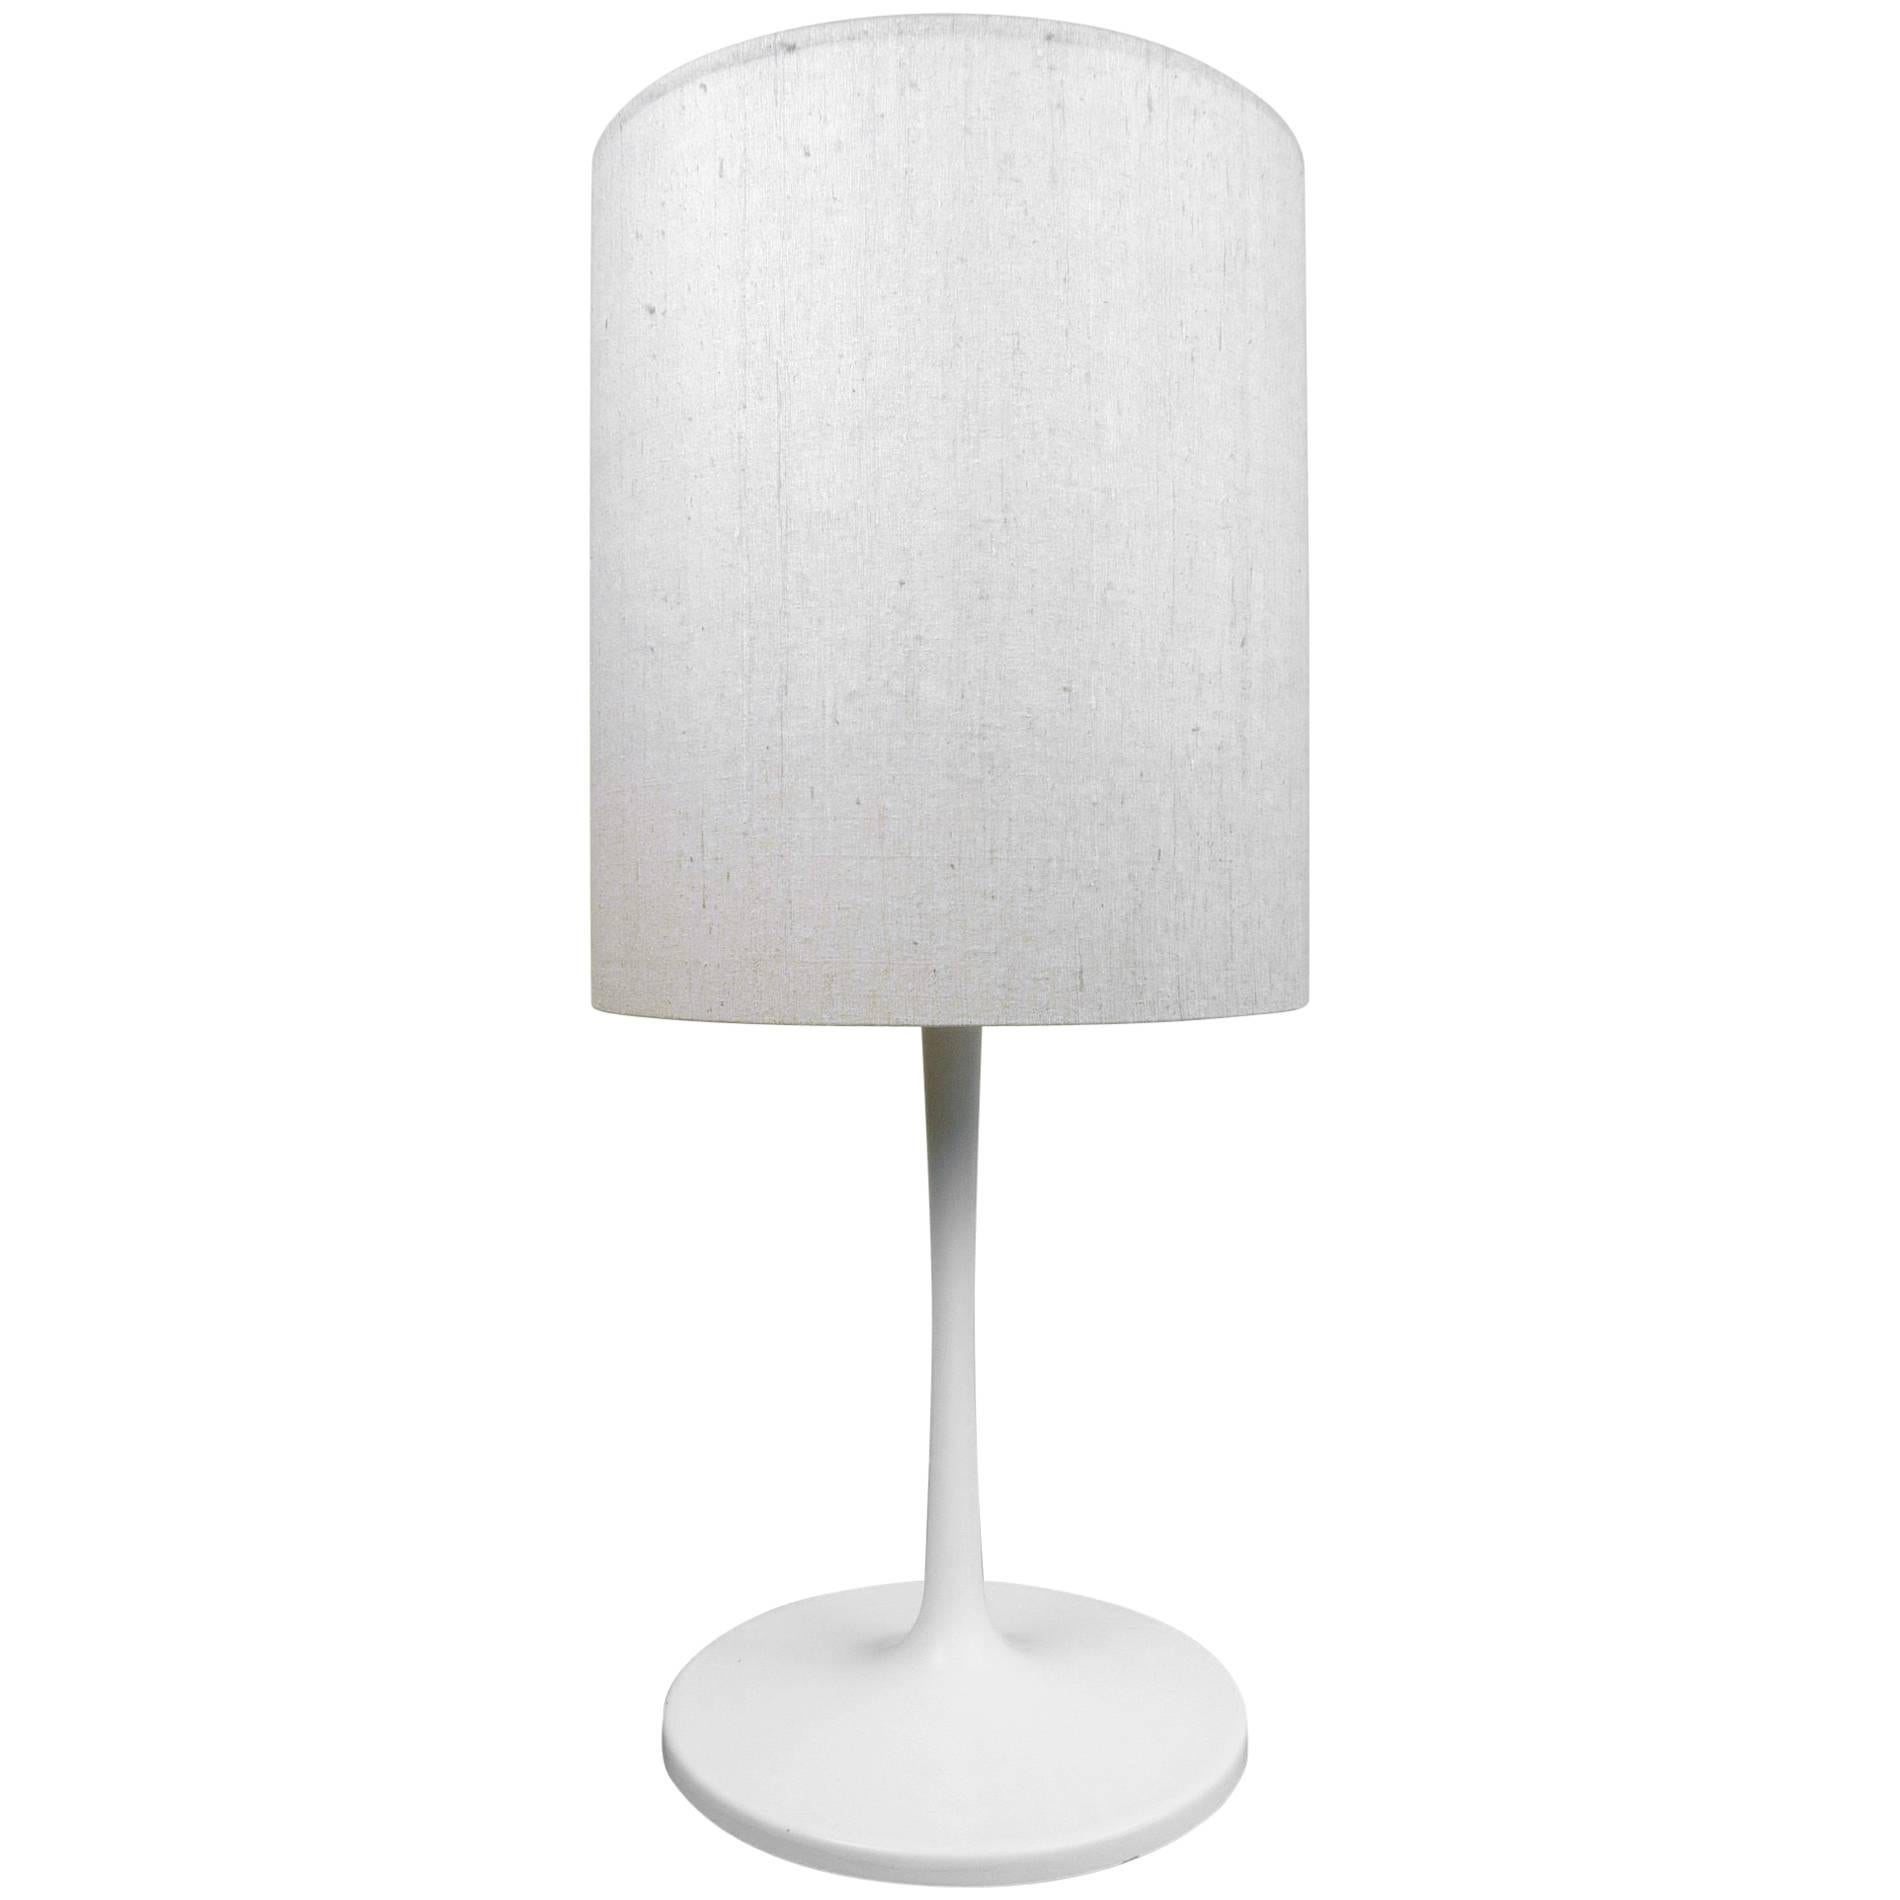 Floor Lamp with White Tulip Base from Staff, Germany, 1960s For Sale